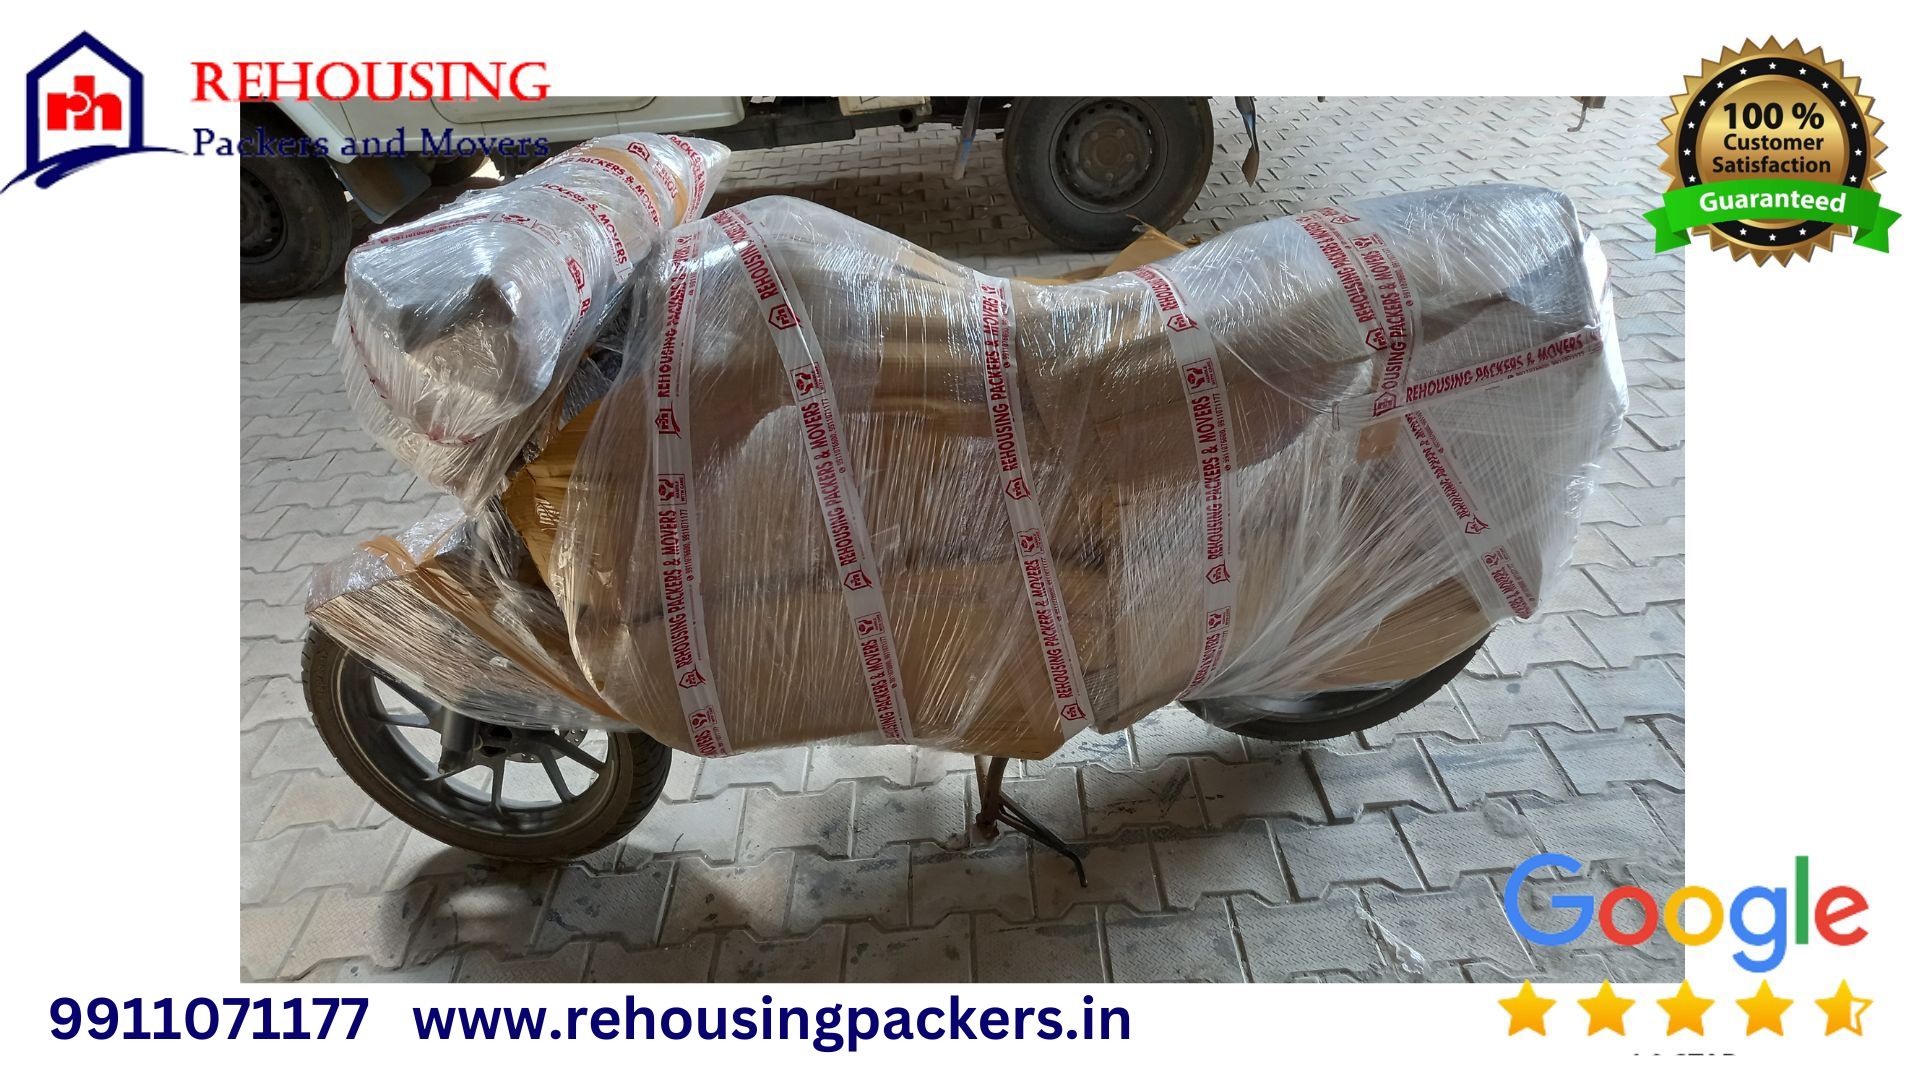 Packers and Movers from Lucknow to Chandigarh